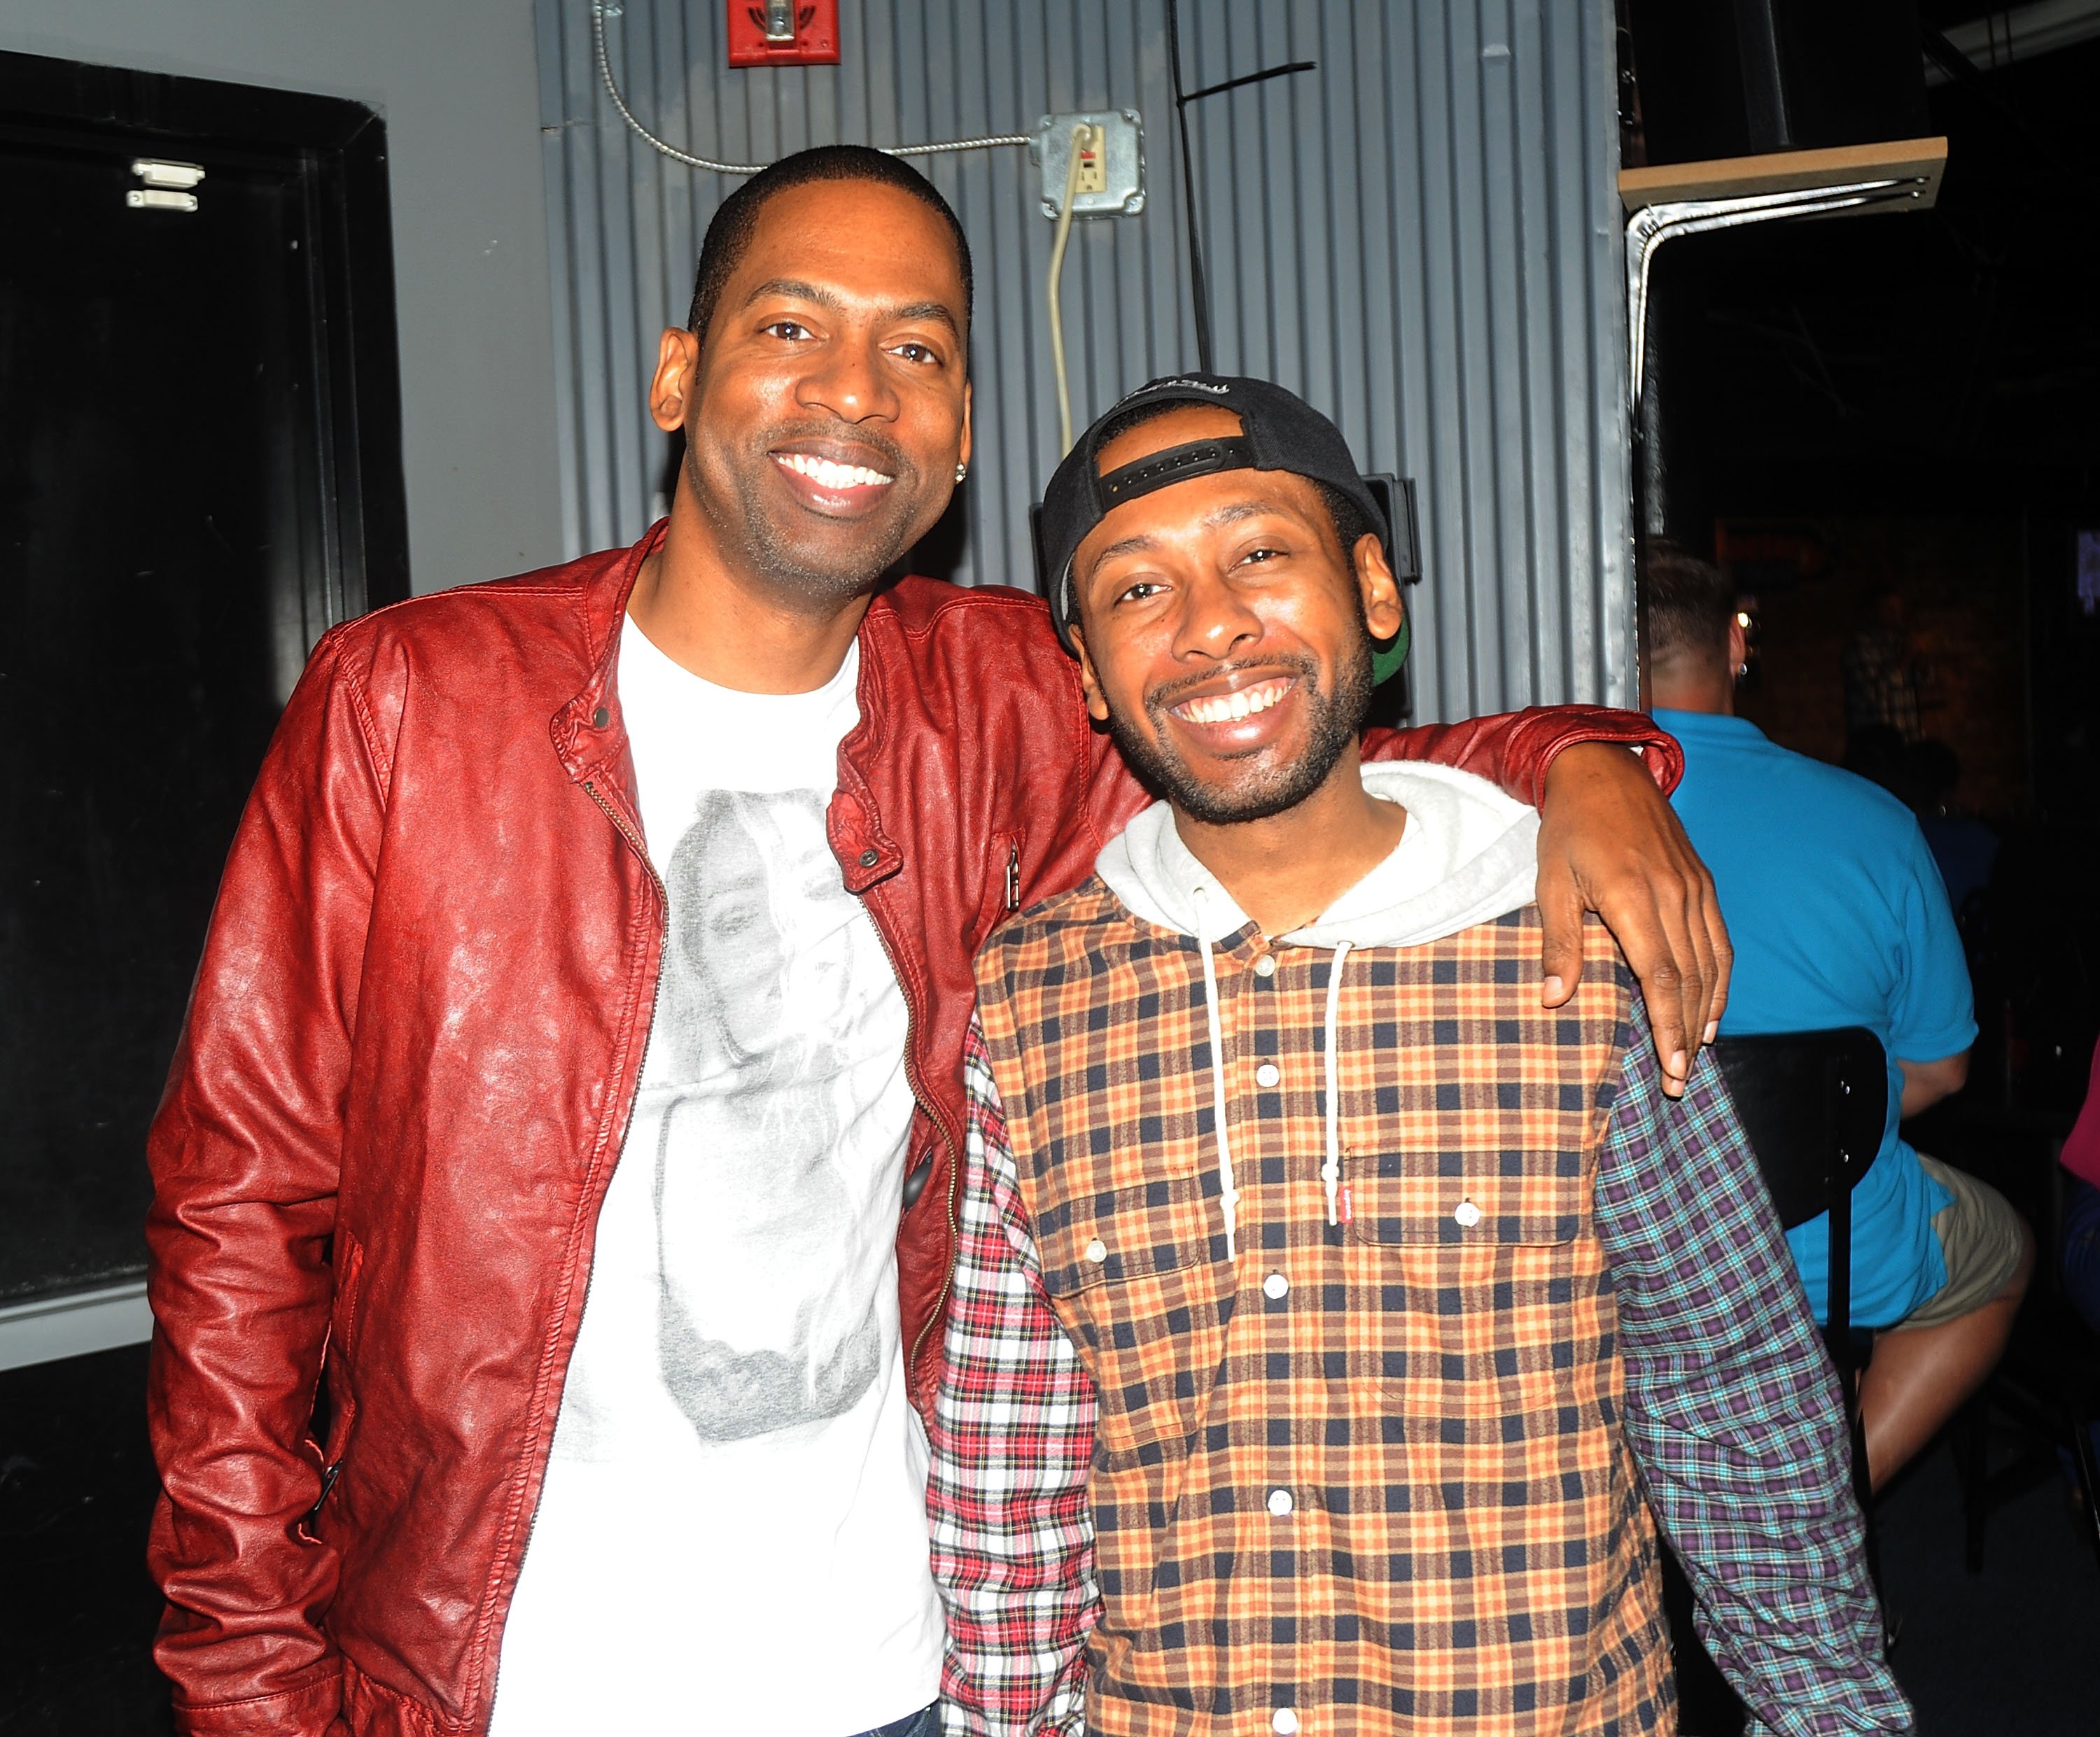 Tony Rock and his brother Jordan Rock backstage at The Stress Factory Comedy Club on August 15, 2014, in New Brunswick, New Jersey. | Source: Getty Images